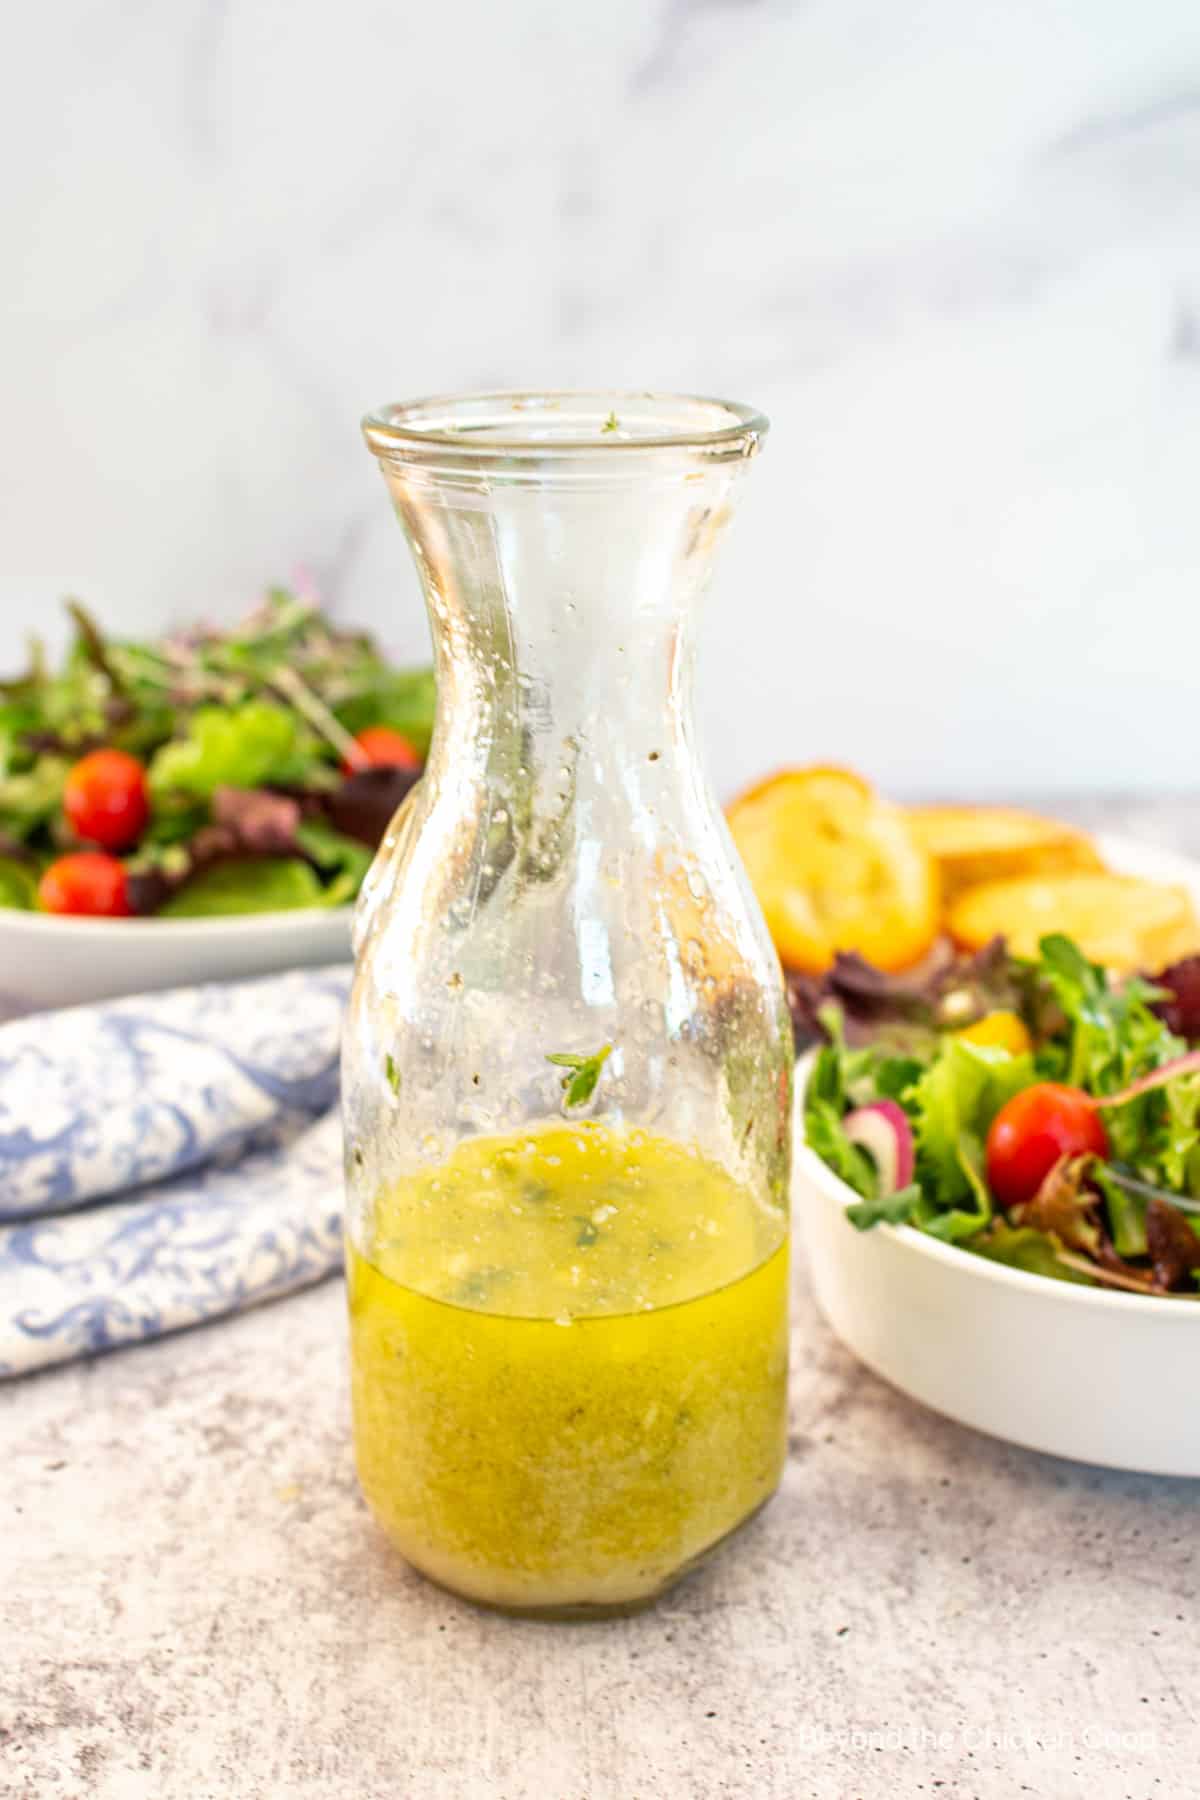 A carafe filled with a yellow dressing.